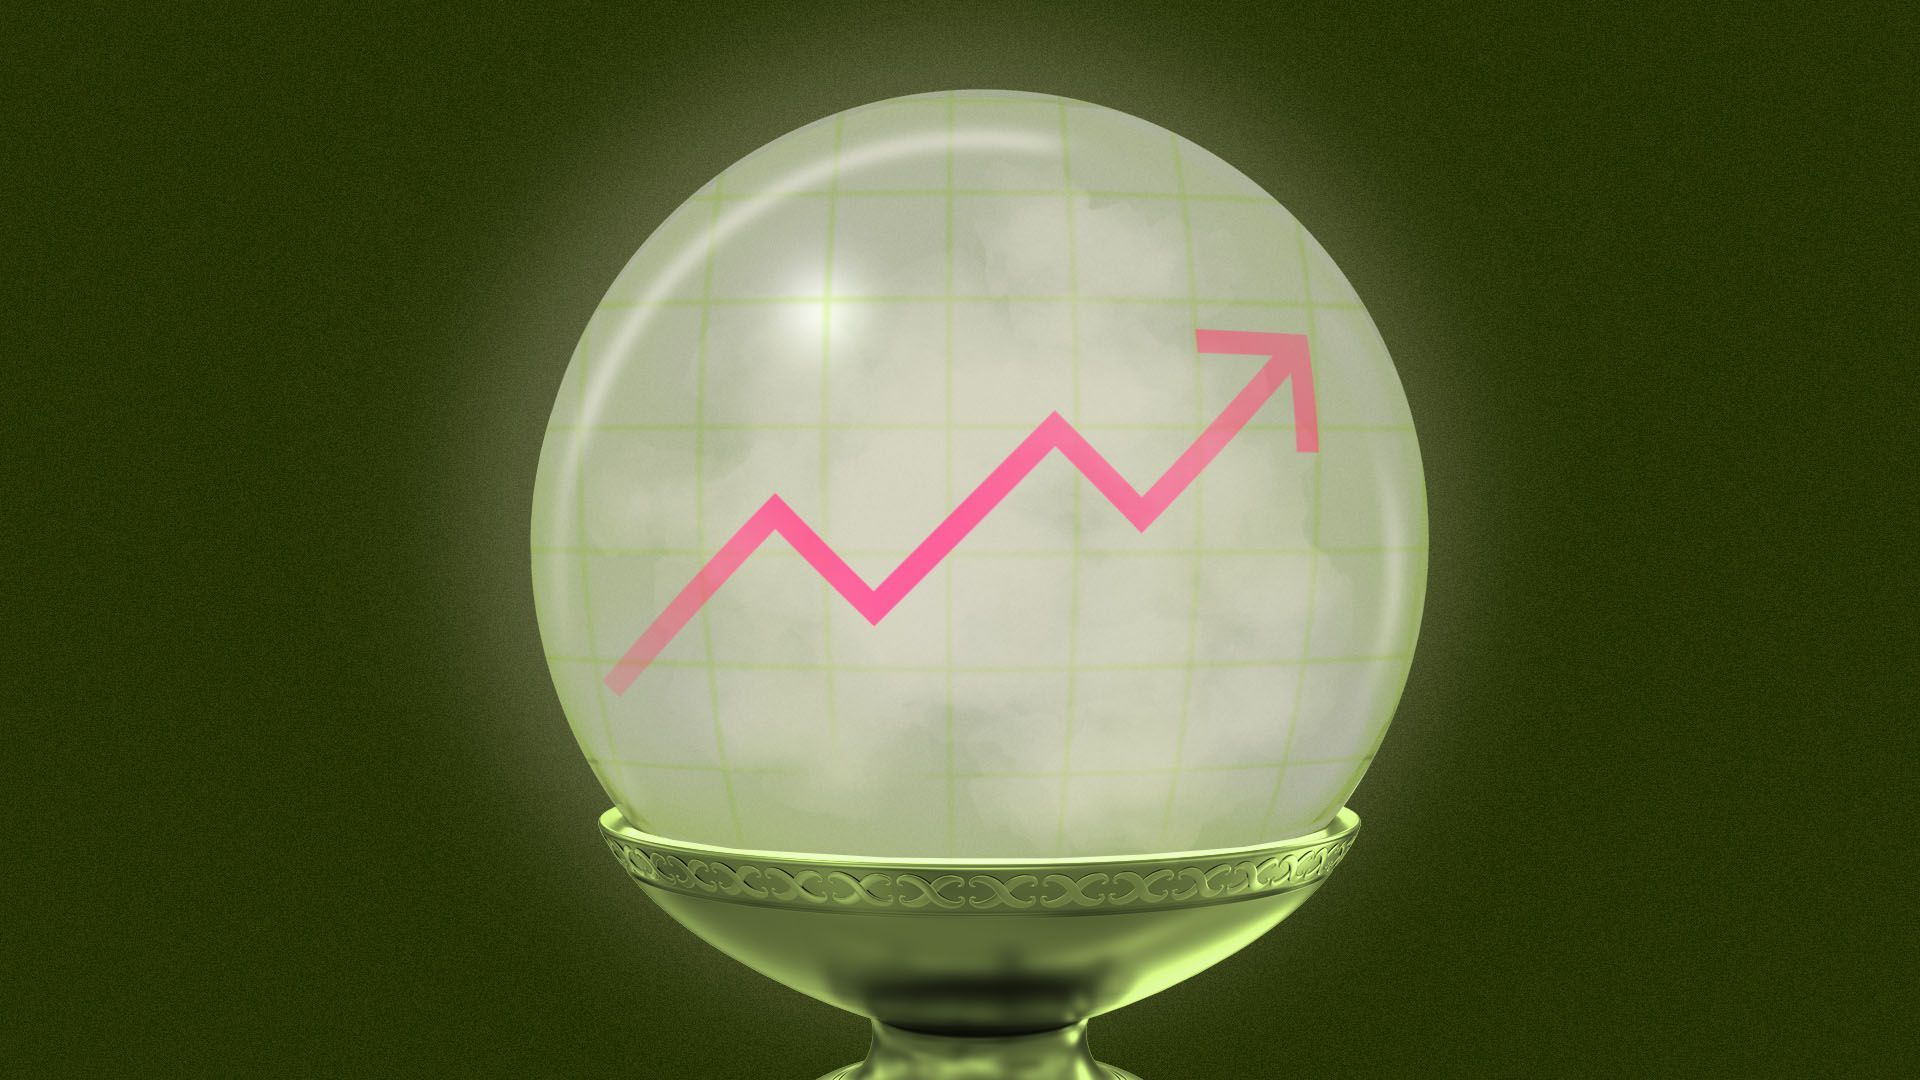 Illustration of a crystal ball showing a stock chart